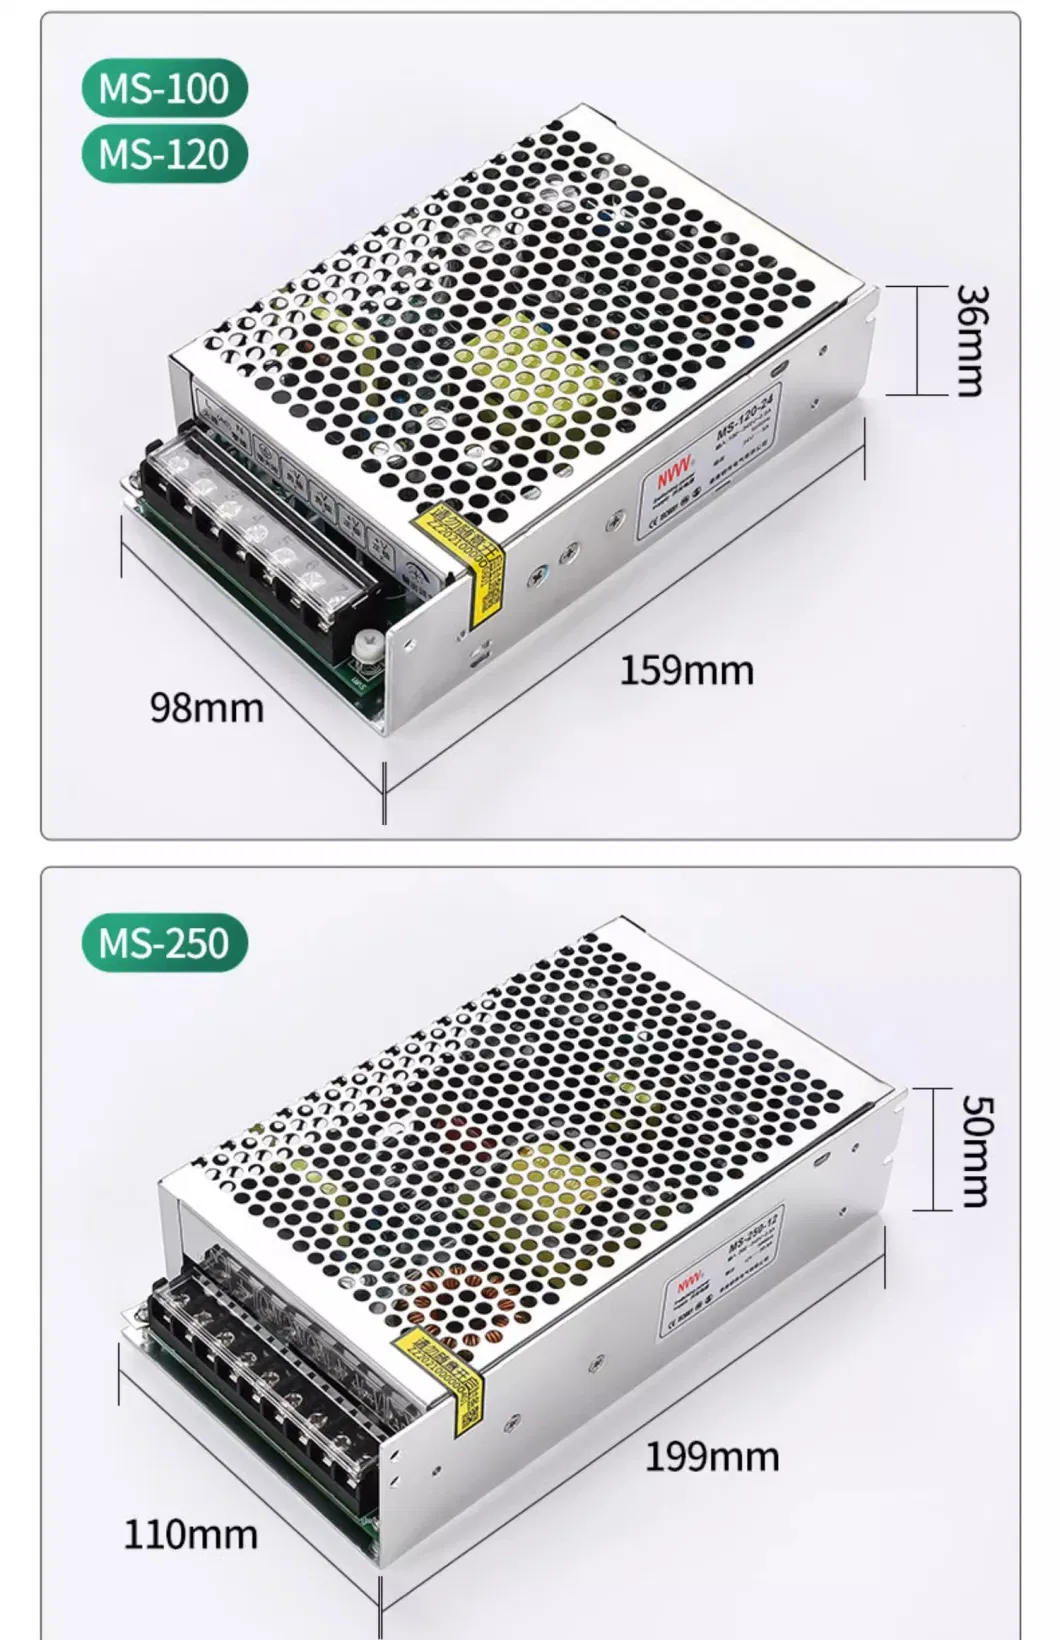 Nvvv Ms Series Switching Power Supply Units AC-DC Power Supply 5V/12V/24V 15W/25W/50W/60W/100W/120W/250W/300W/350W